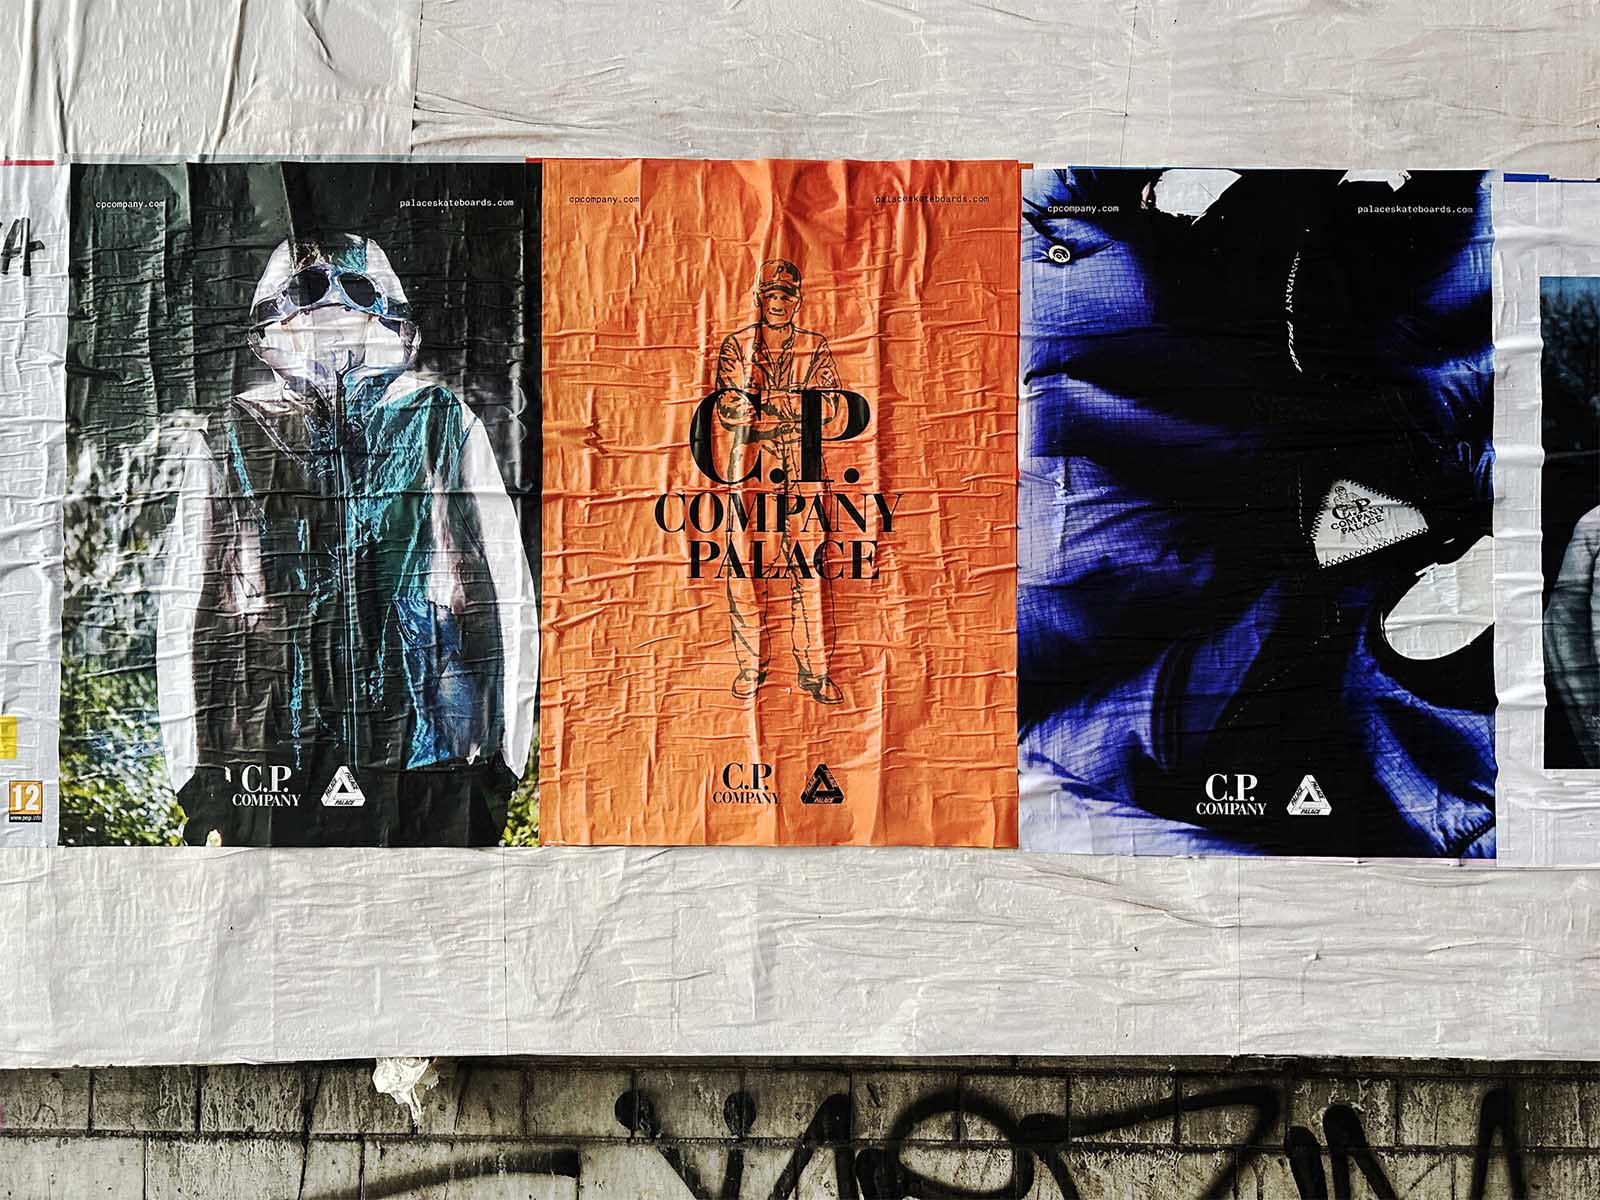 cp company x palace - flyposting - london